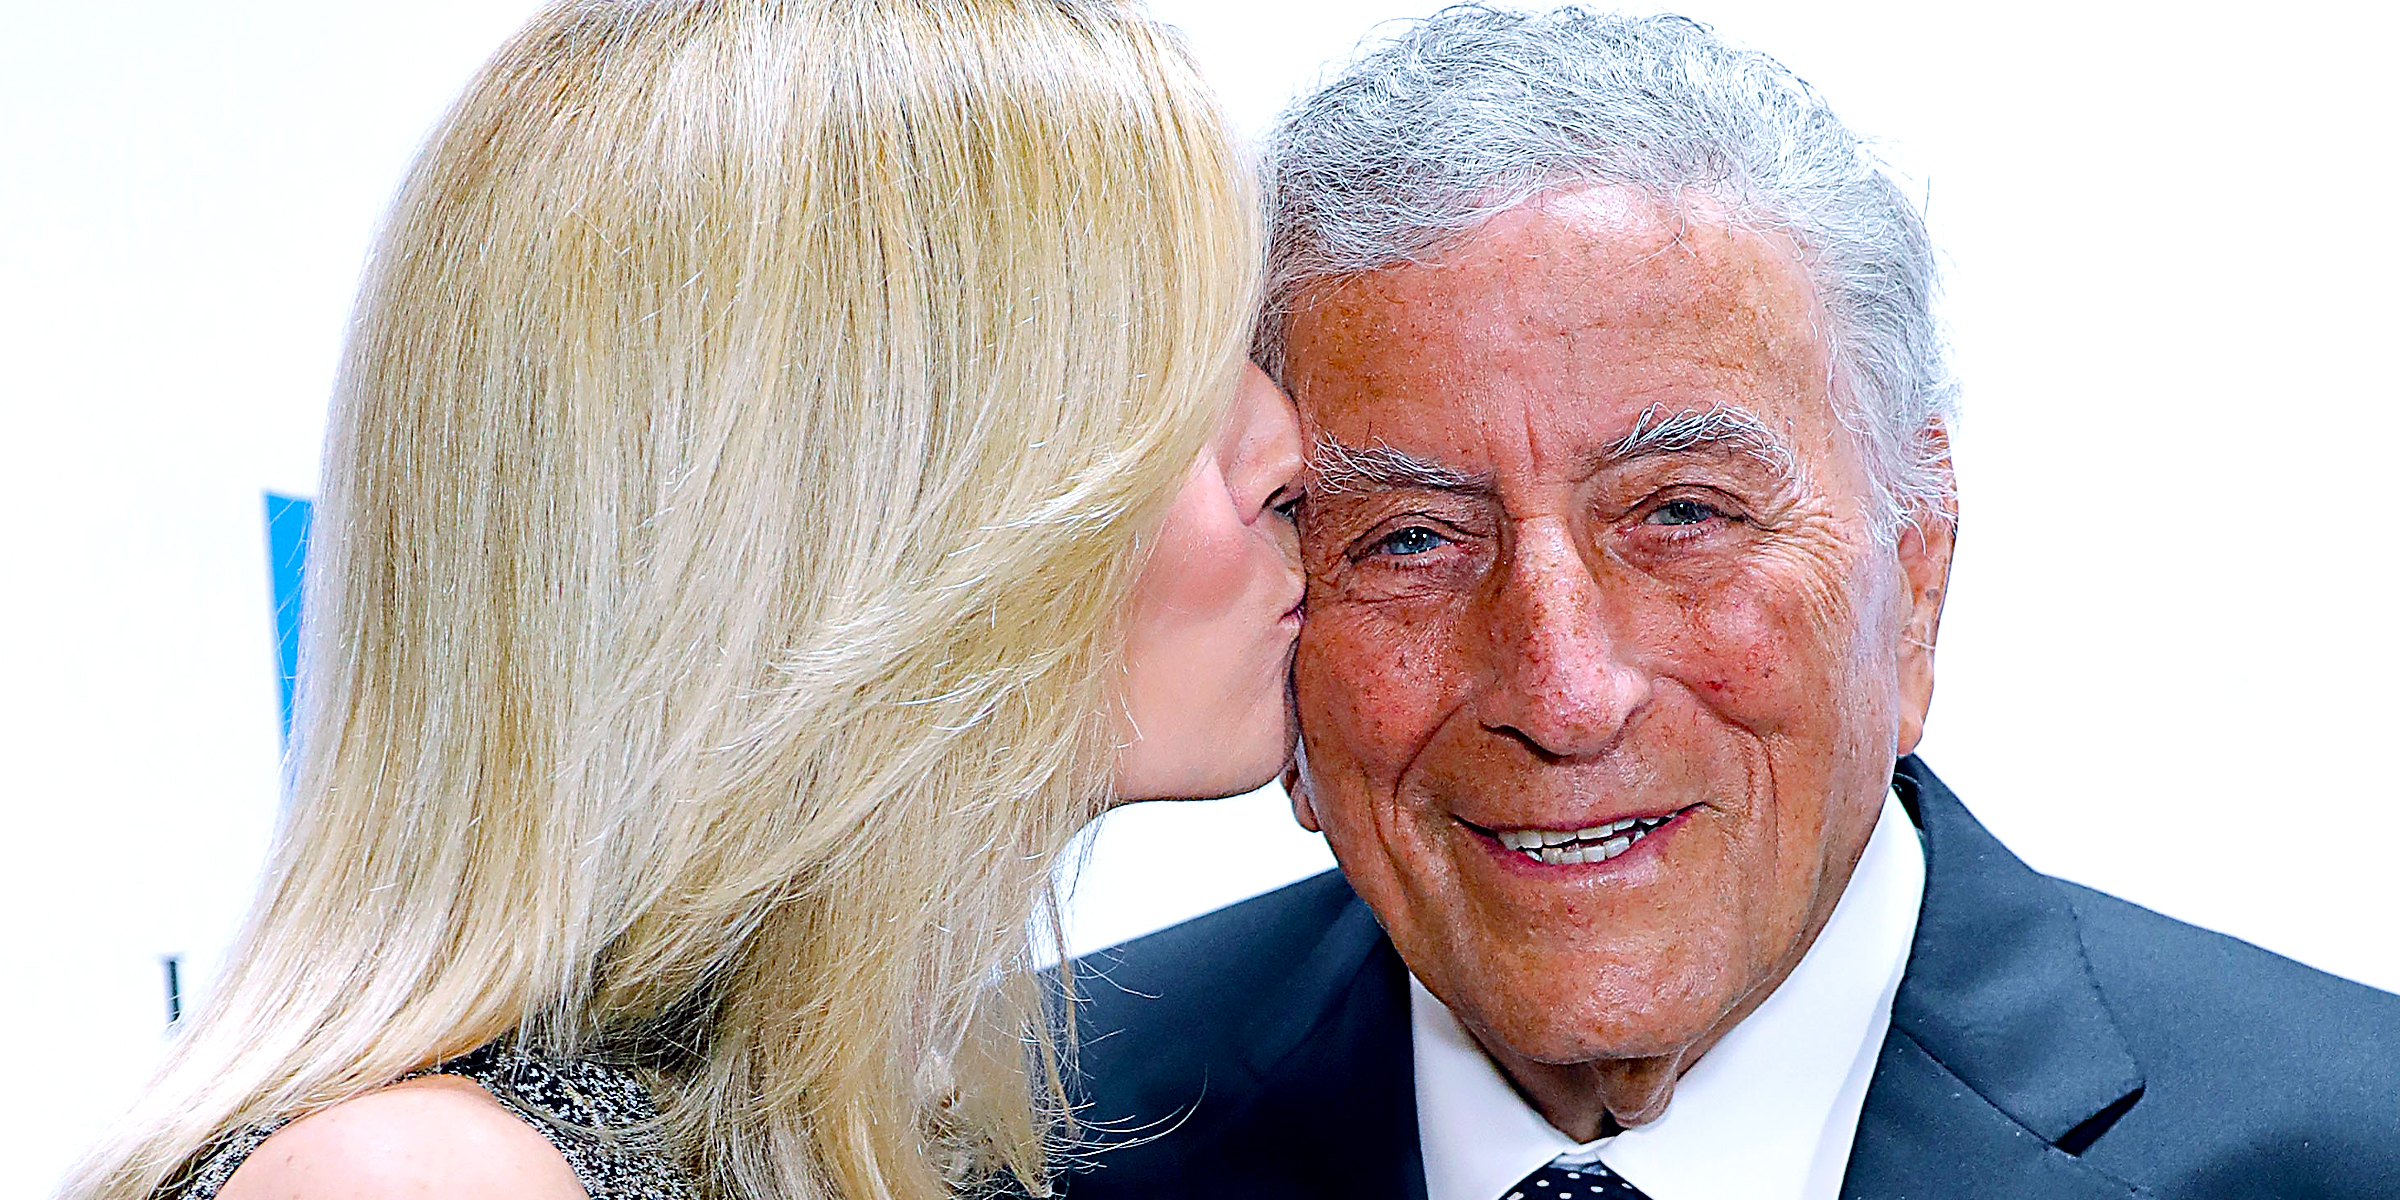 Susan Crow and Tony Bennett | Source: Getty Images